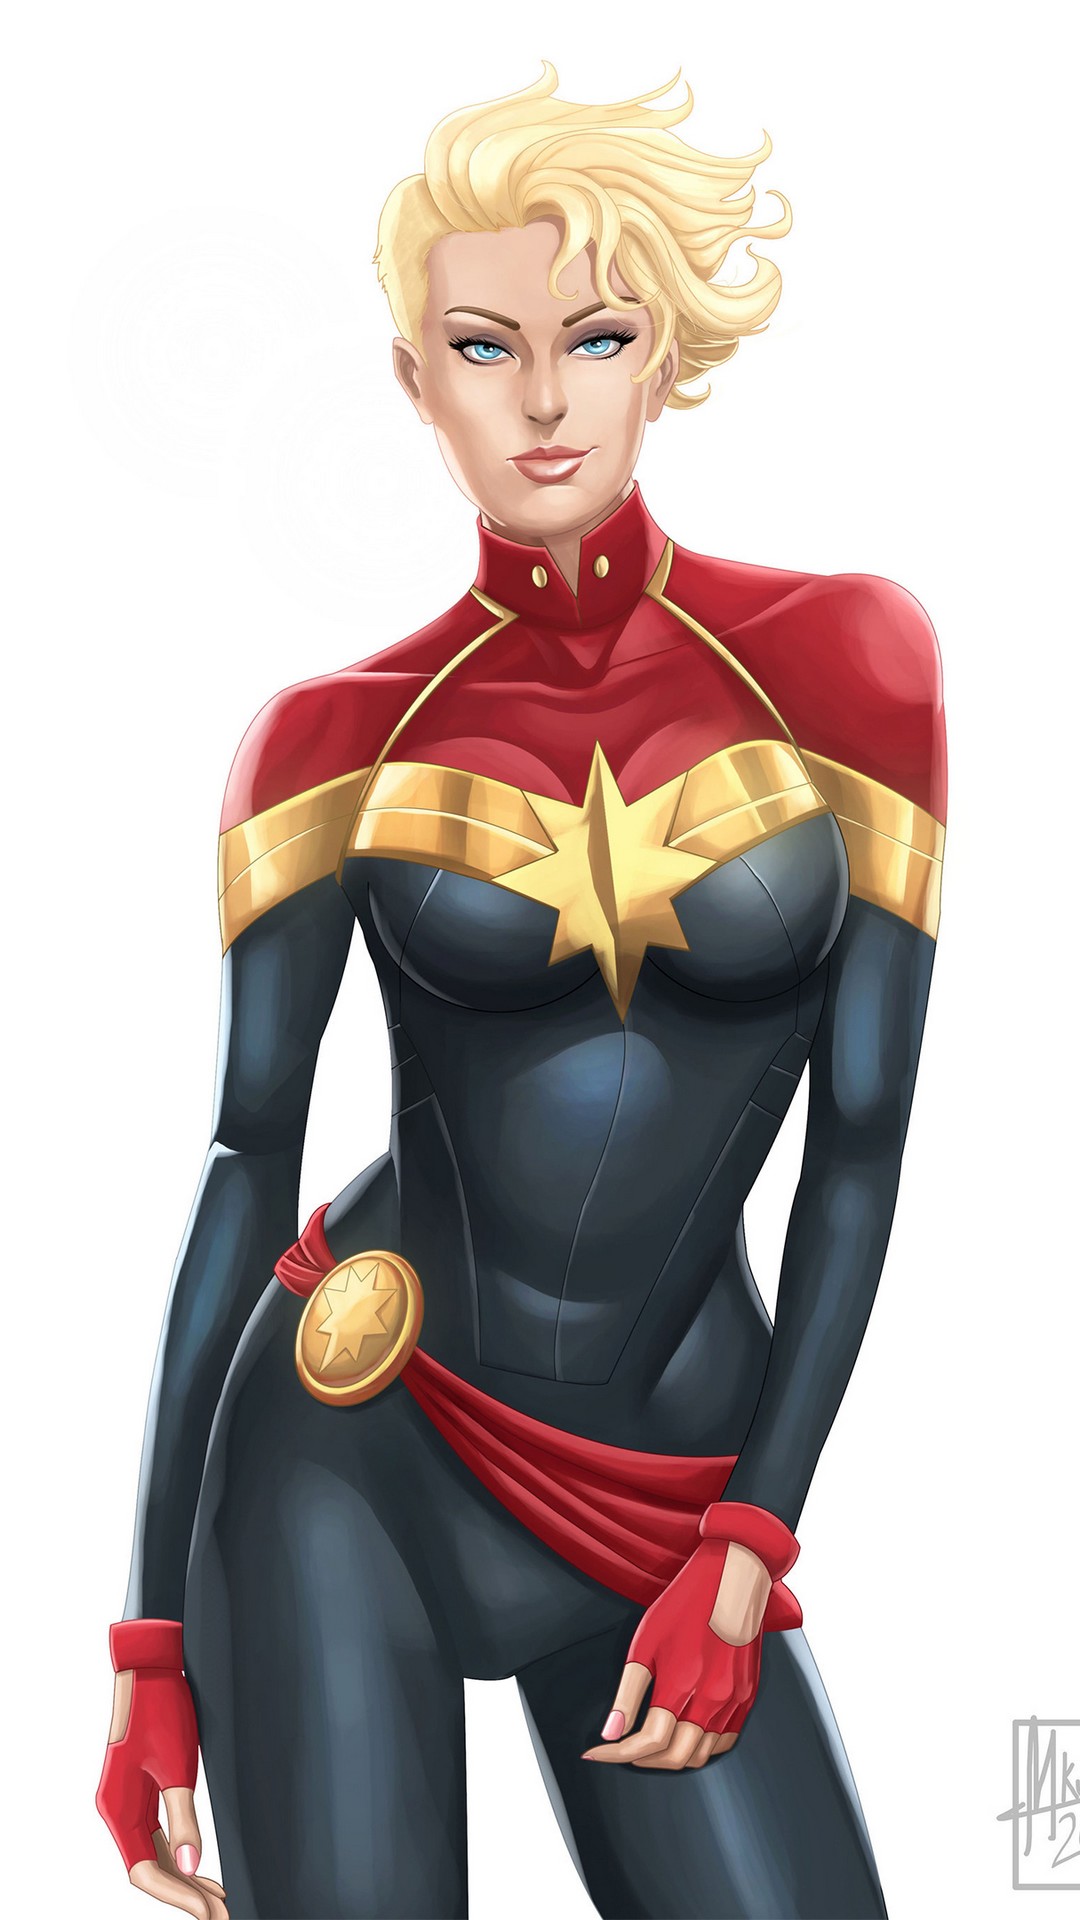 Captain Marvel Animated iPhone X Wallpaper HD with high-resolution 1080x1920 pixel. Download all Mobile Wallpapers and Use them as wallpapers for your iPhone, Tablet, iPad, Android and other mobile devices